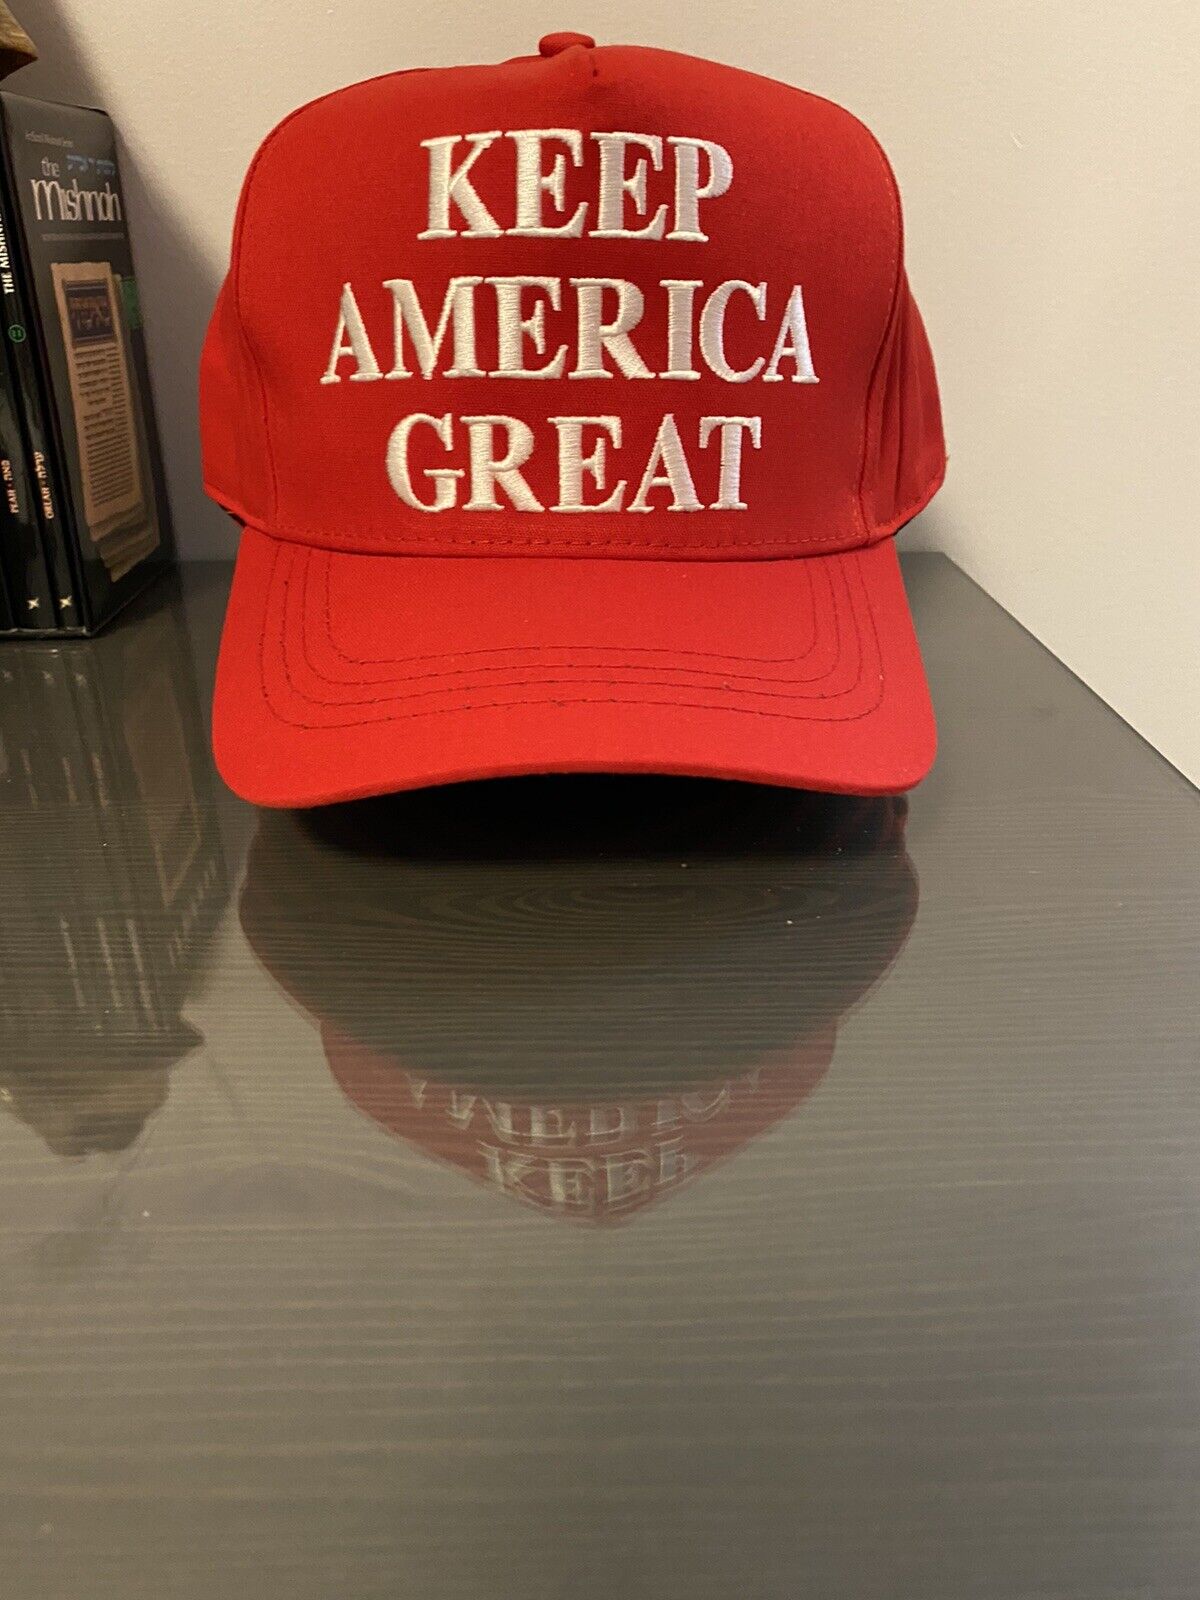 Authentic Brand NWT Keep America great KAG 2020 red cap hat Trump Official rare